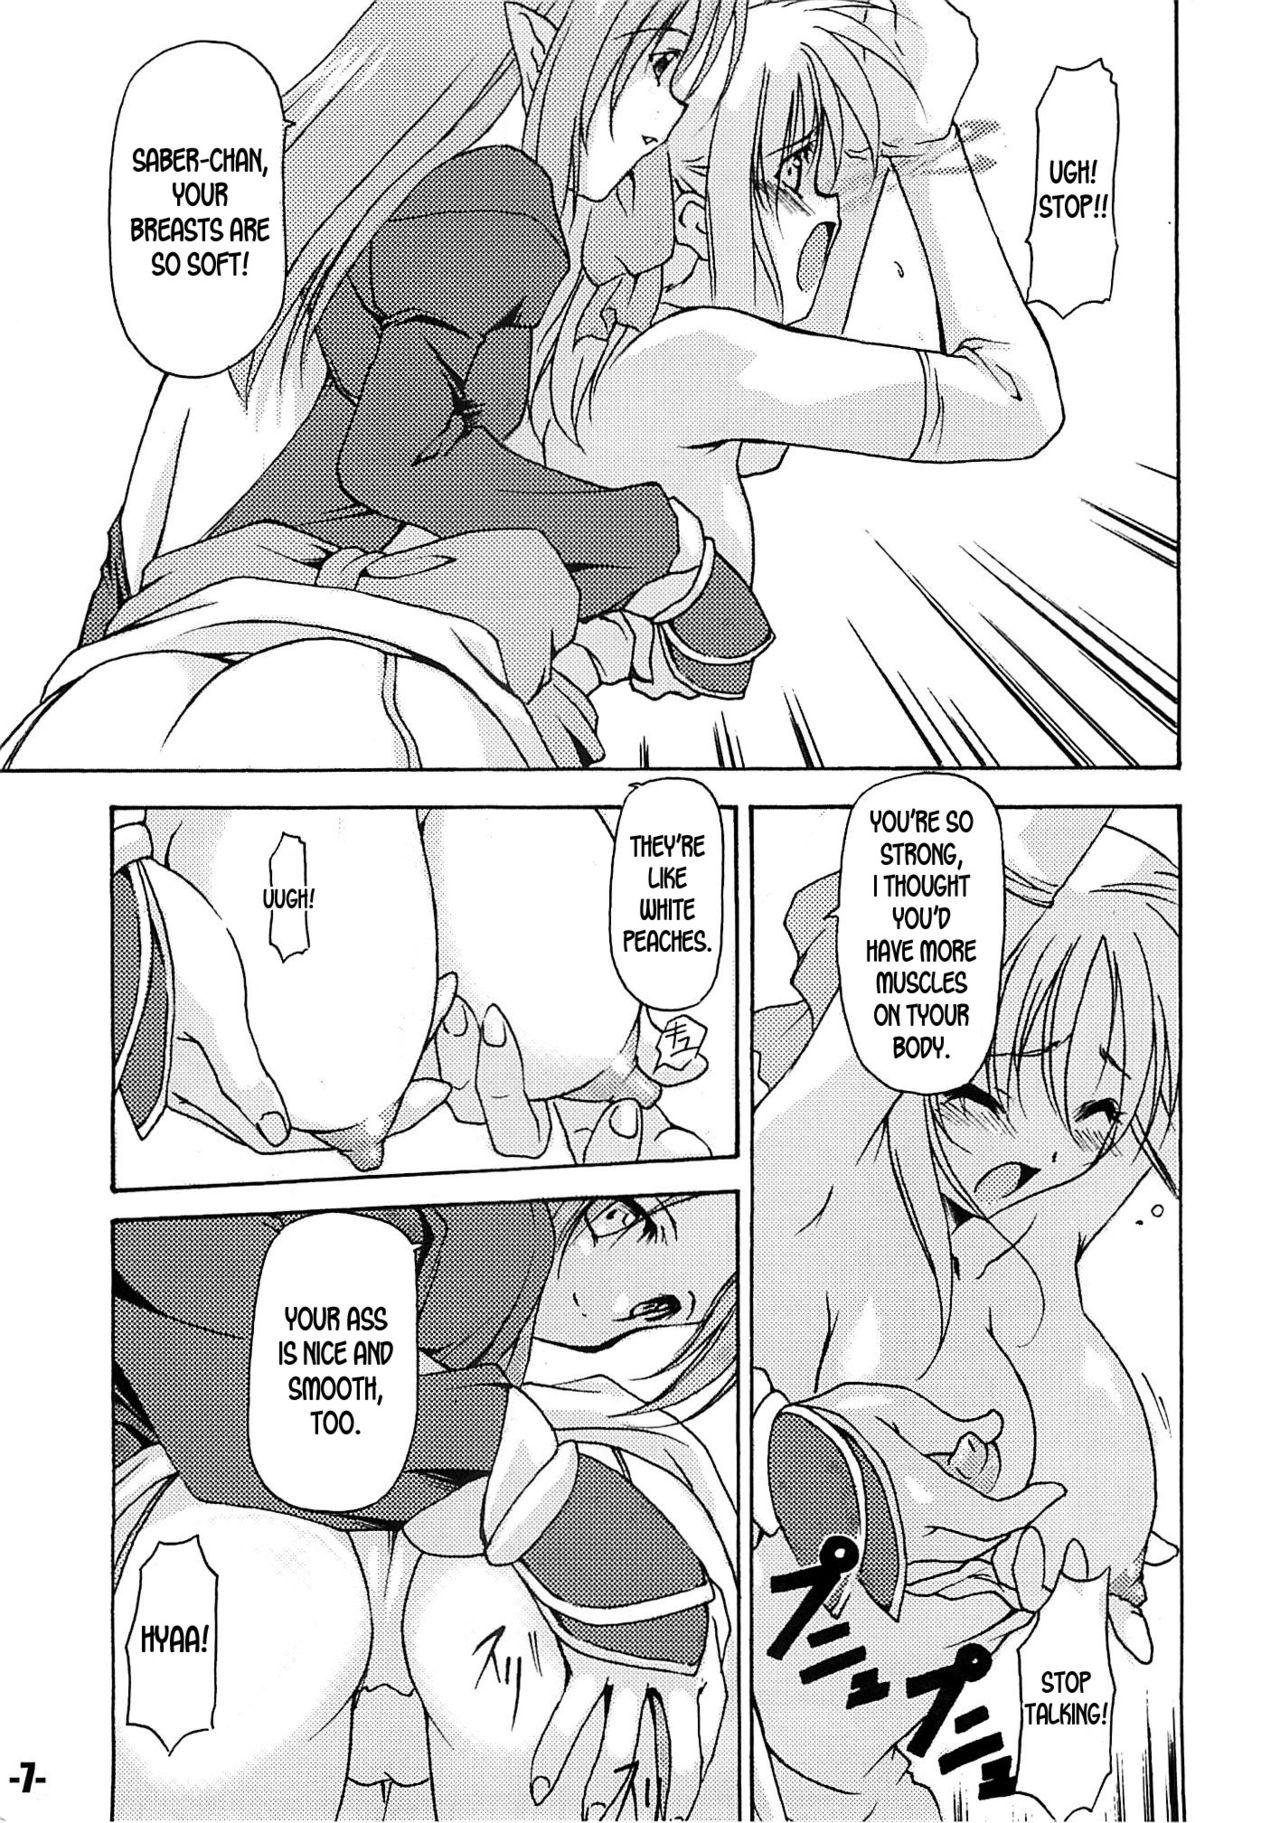 Lolicon EXtra stage vol. 13 - Fate stay night Blackwoman - Page 6